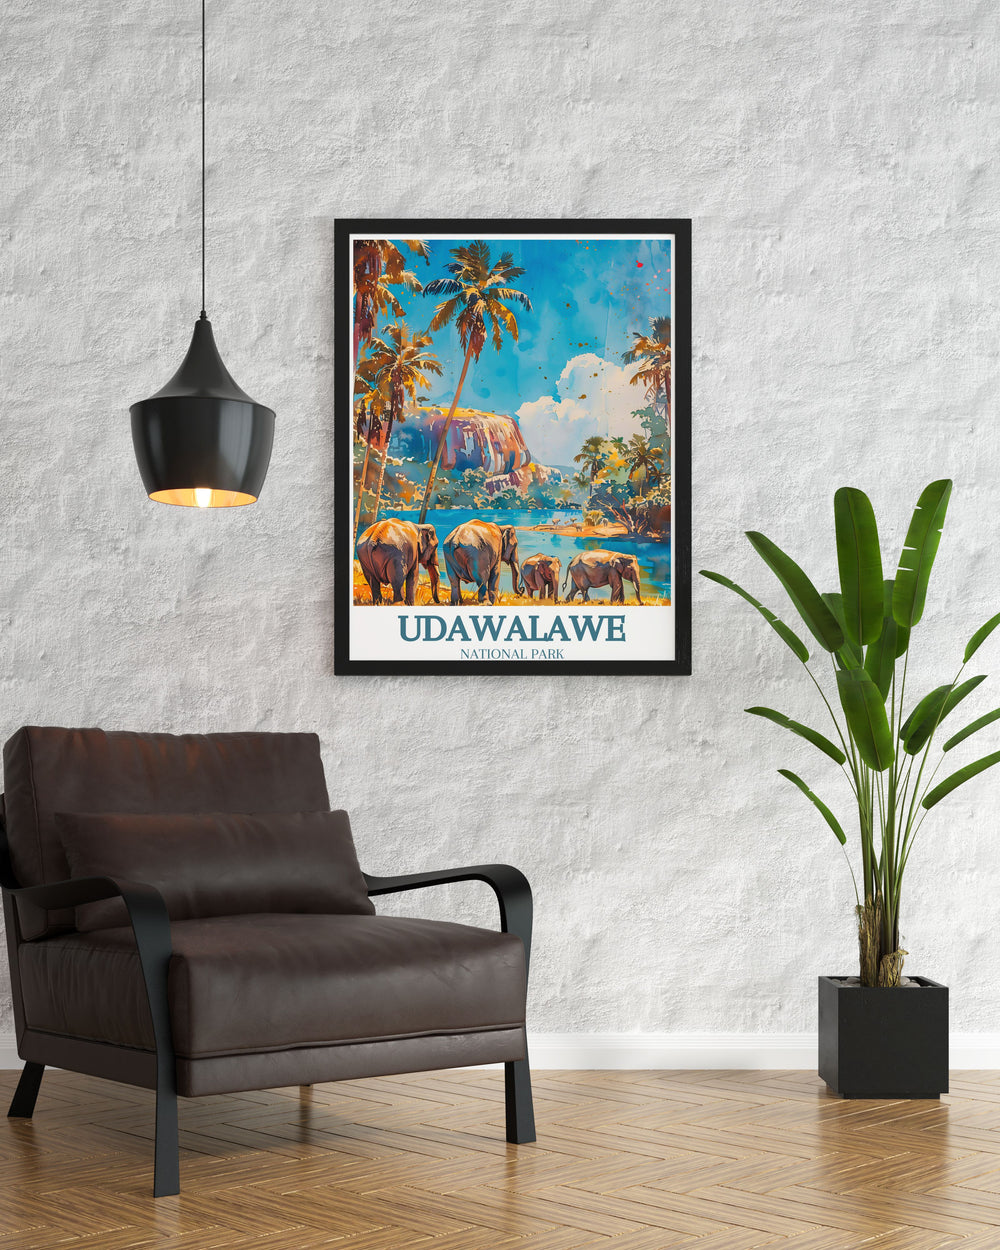 Stunning National Park Poster featuring Udawalawe Reservoir Walawe River ideal for enhancing any room with its depiction of Sri Lankas serene landscapes and diverse wildlife a perfect addition to your collection of nature inspired art prints.